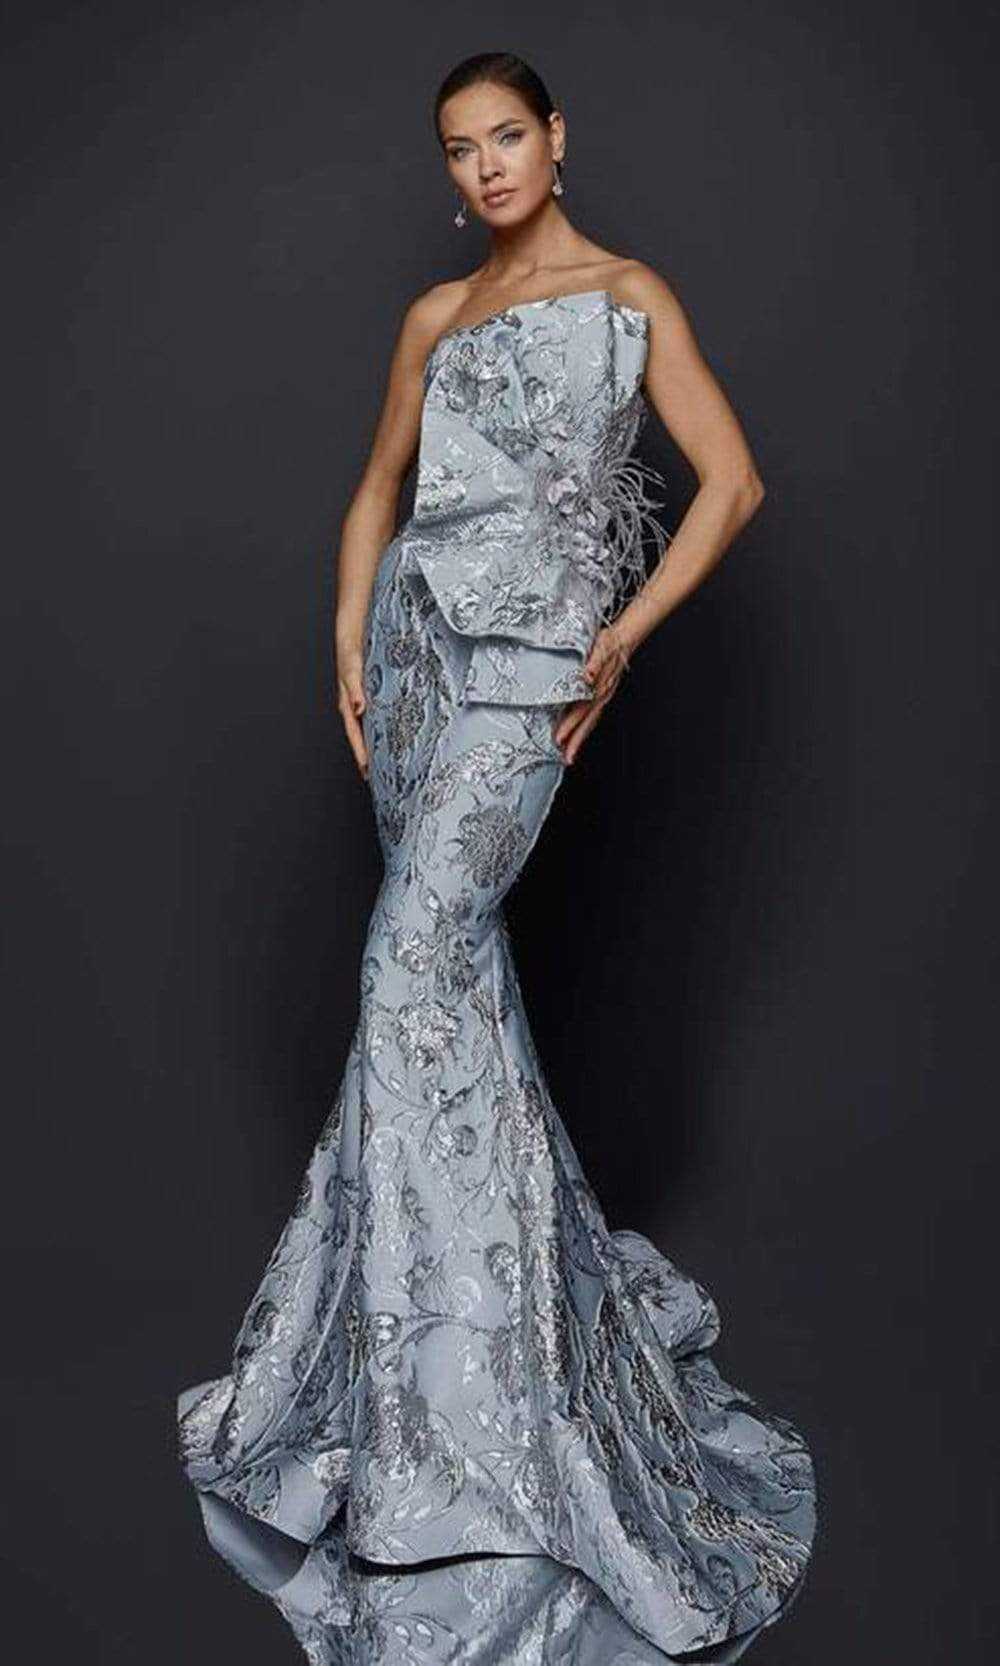 Terani Couture, Terani Couture - Pleat Fan Jacquard Mermaid Gown - 1 pc Silver In Size 14 Available